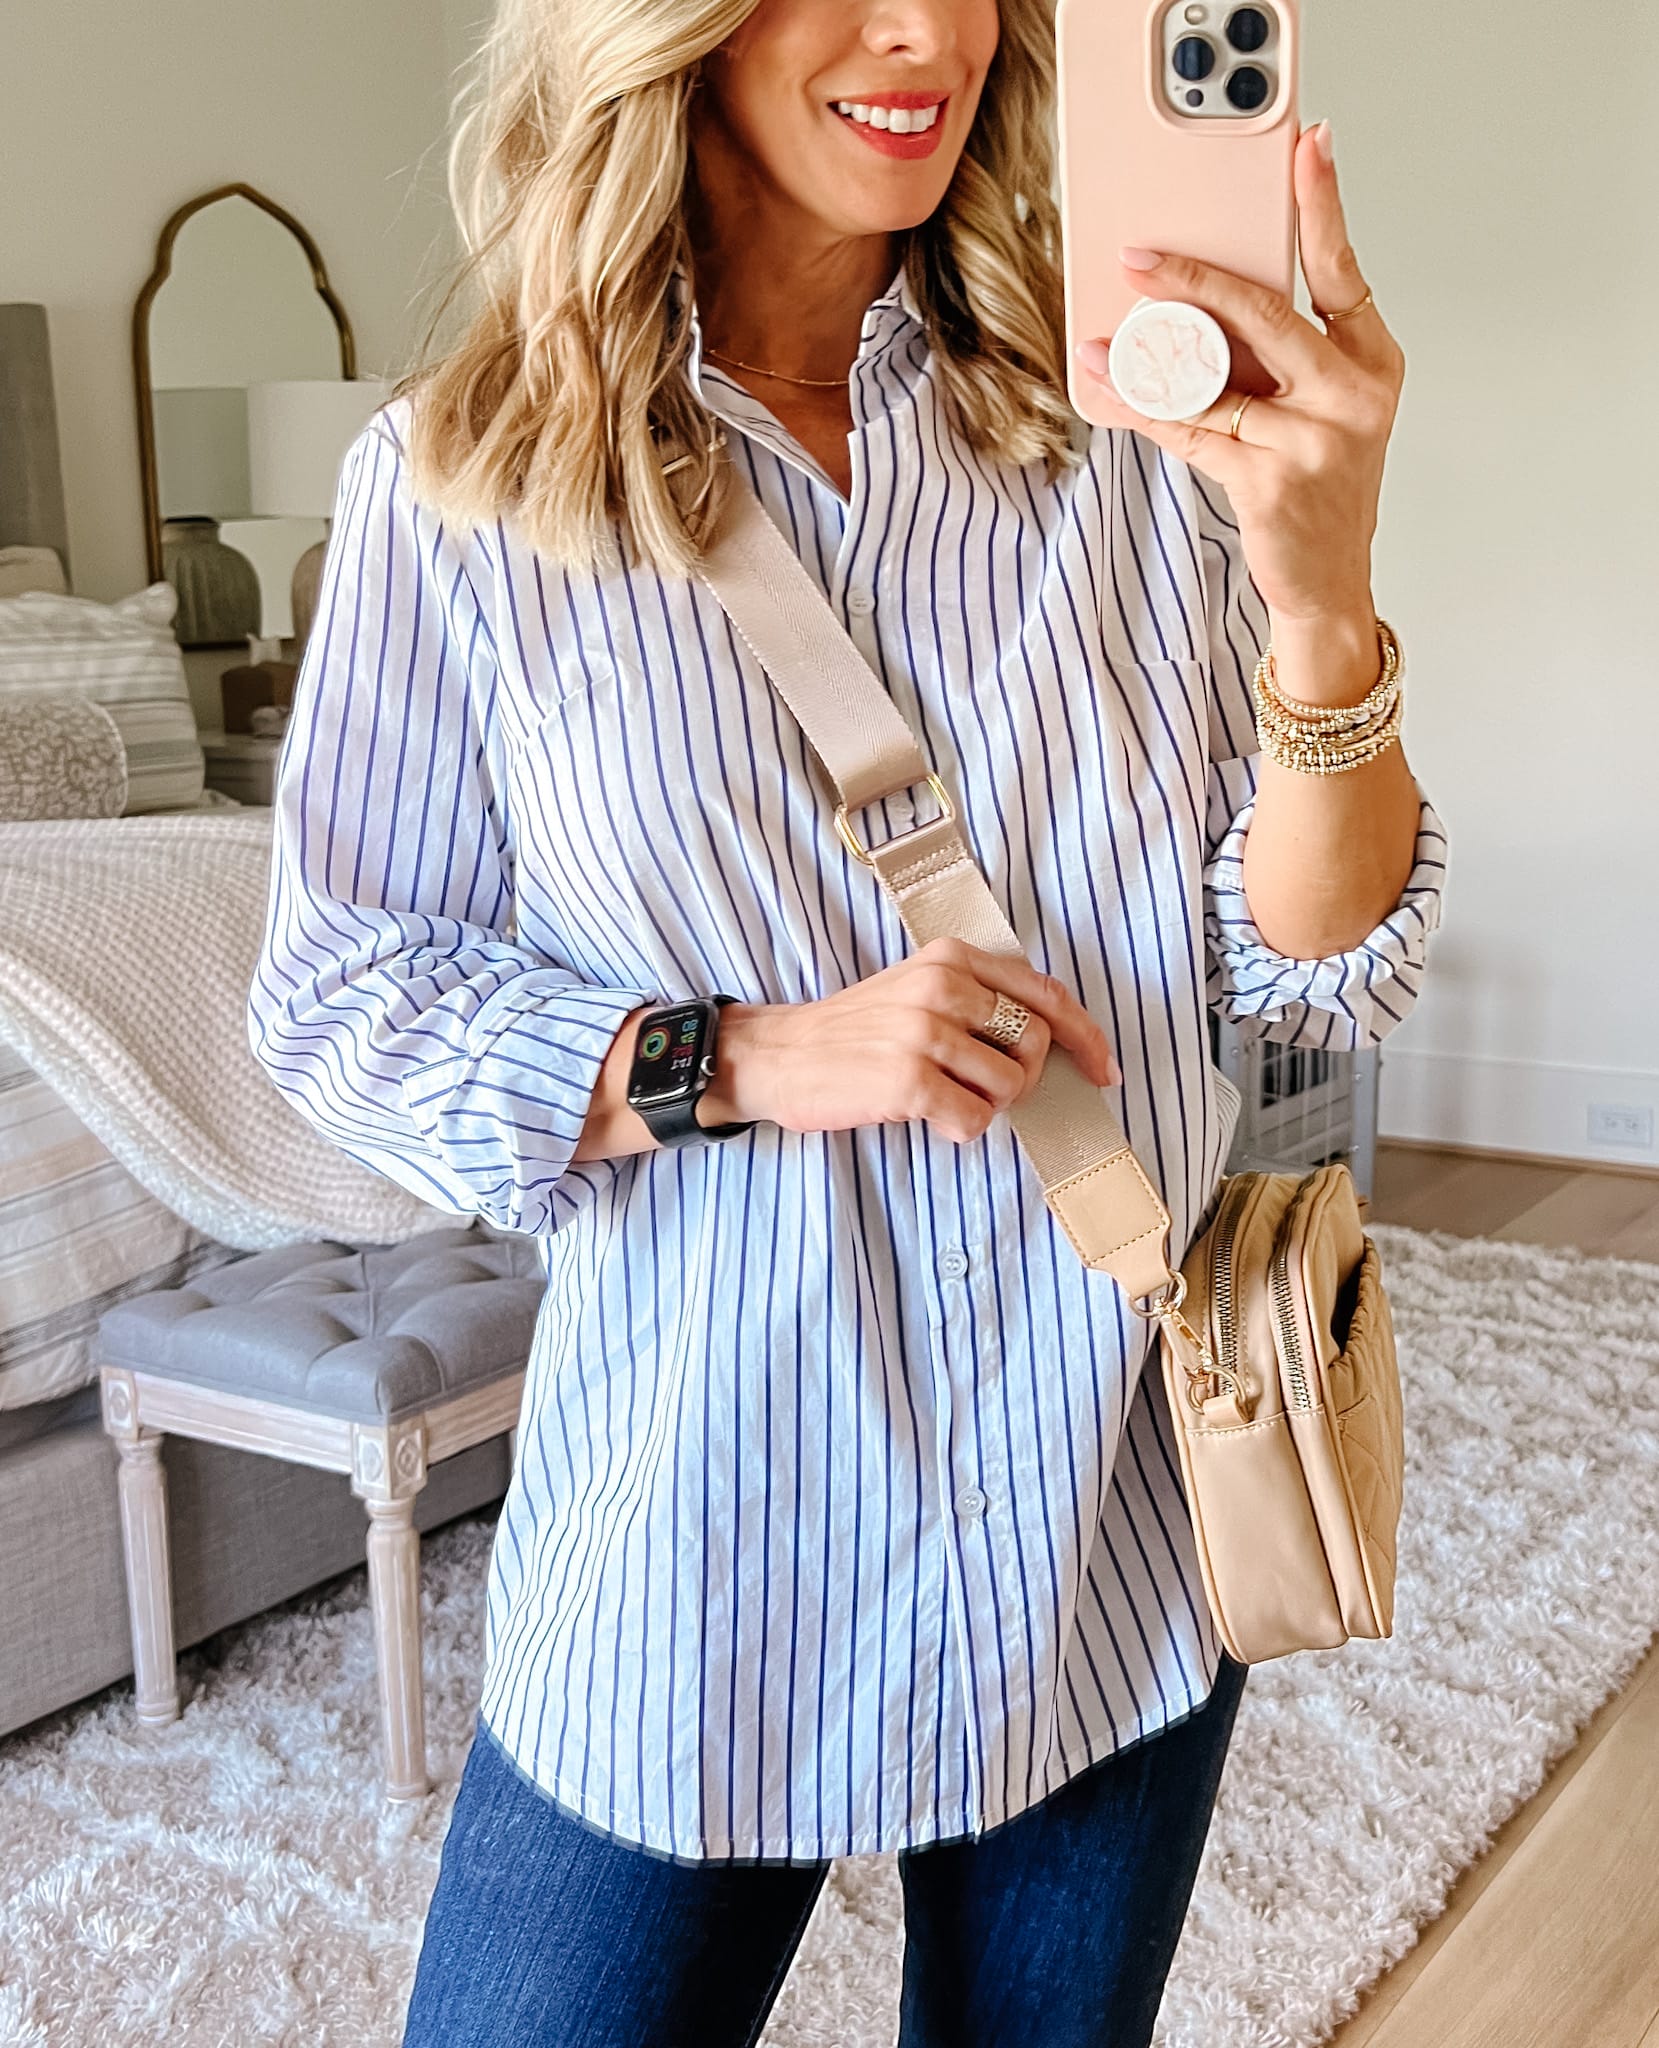 Striped Button Down, Jeans, Sandals, Crossbody